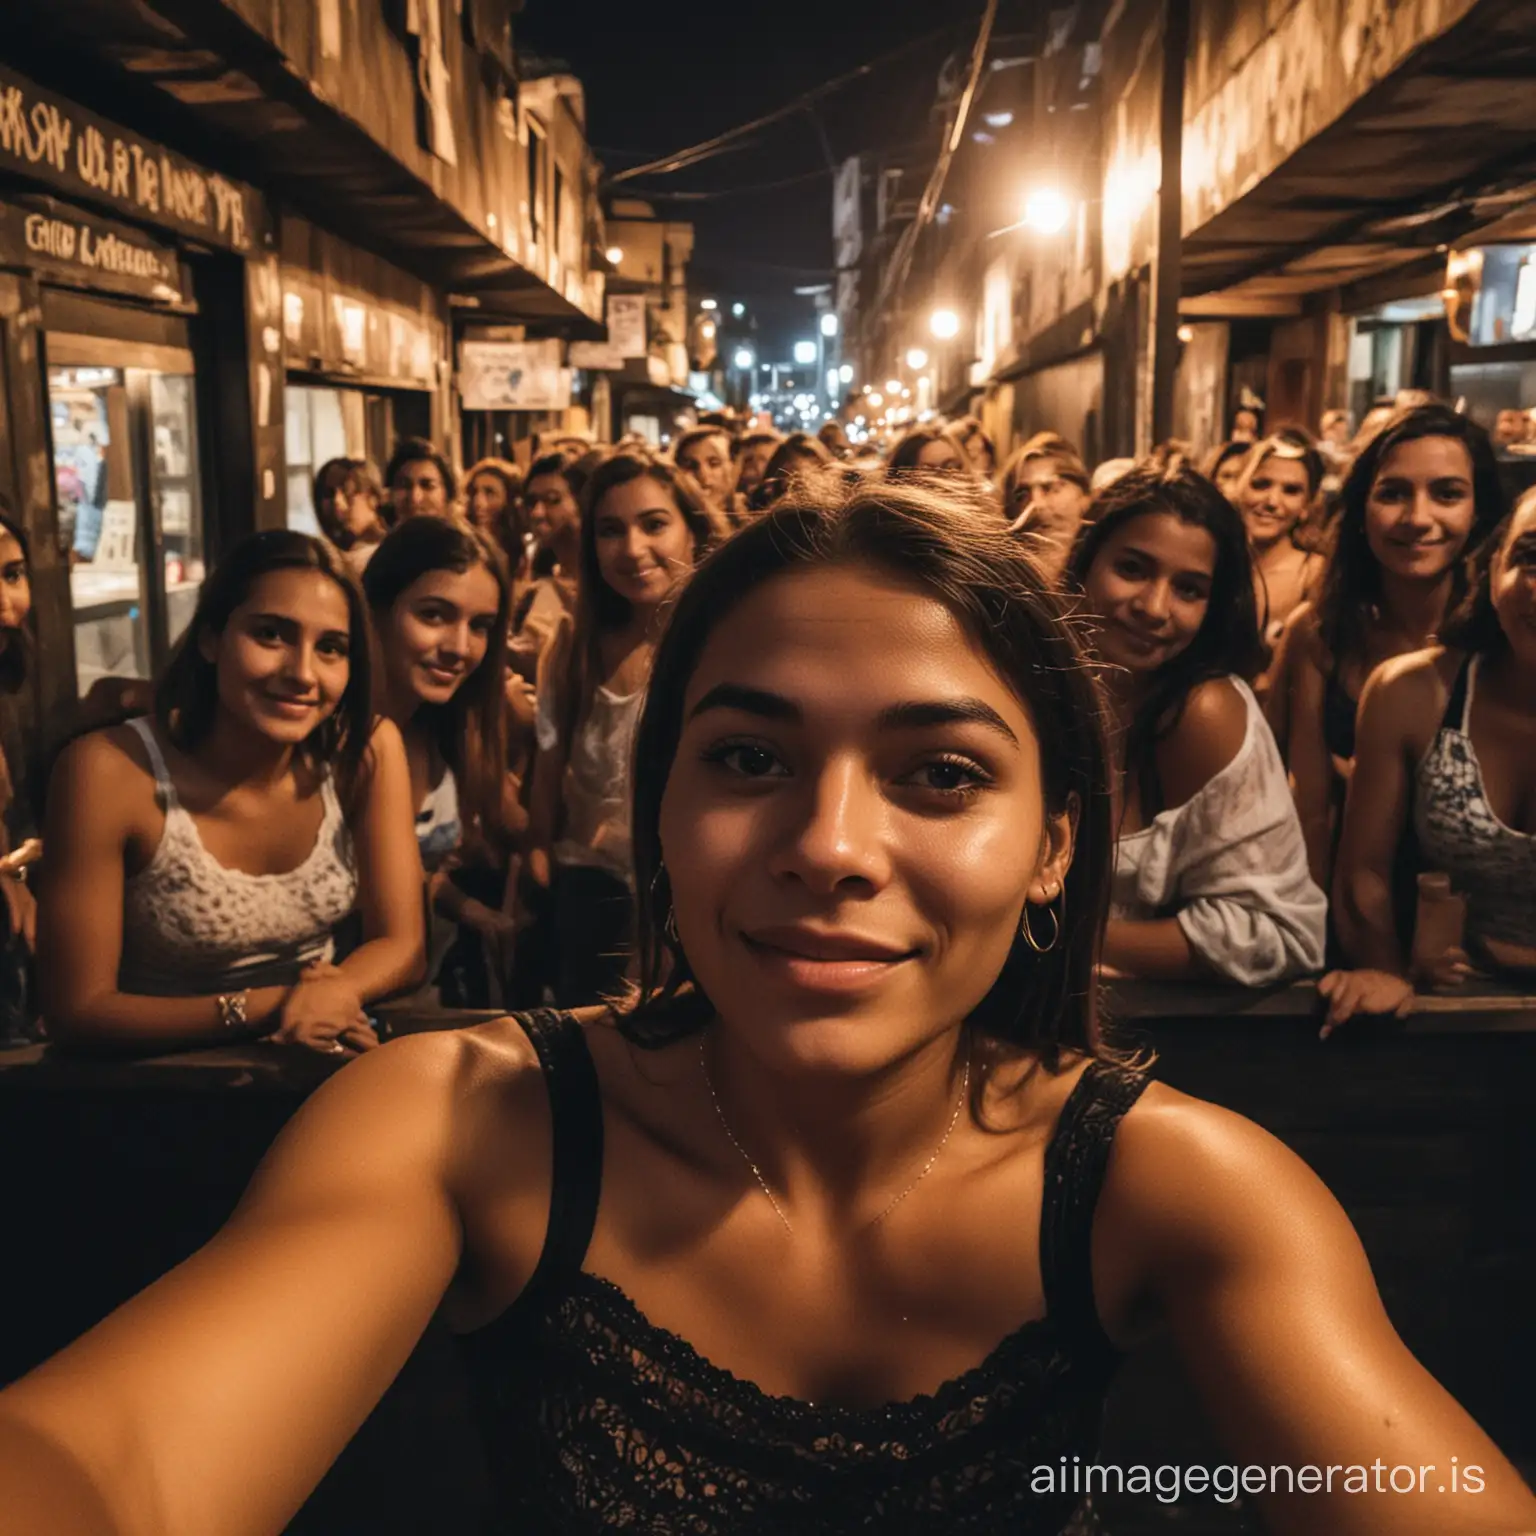 Young-Women-Capturing-Moments-in-Favela-Bar-Selfie